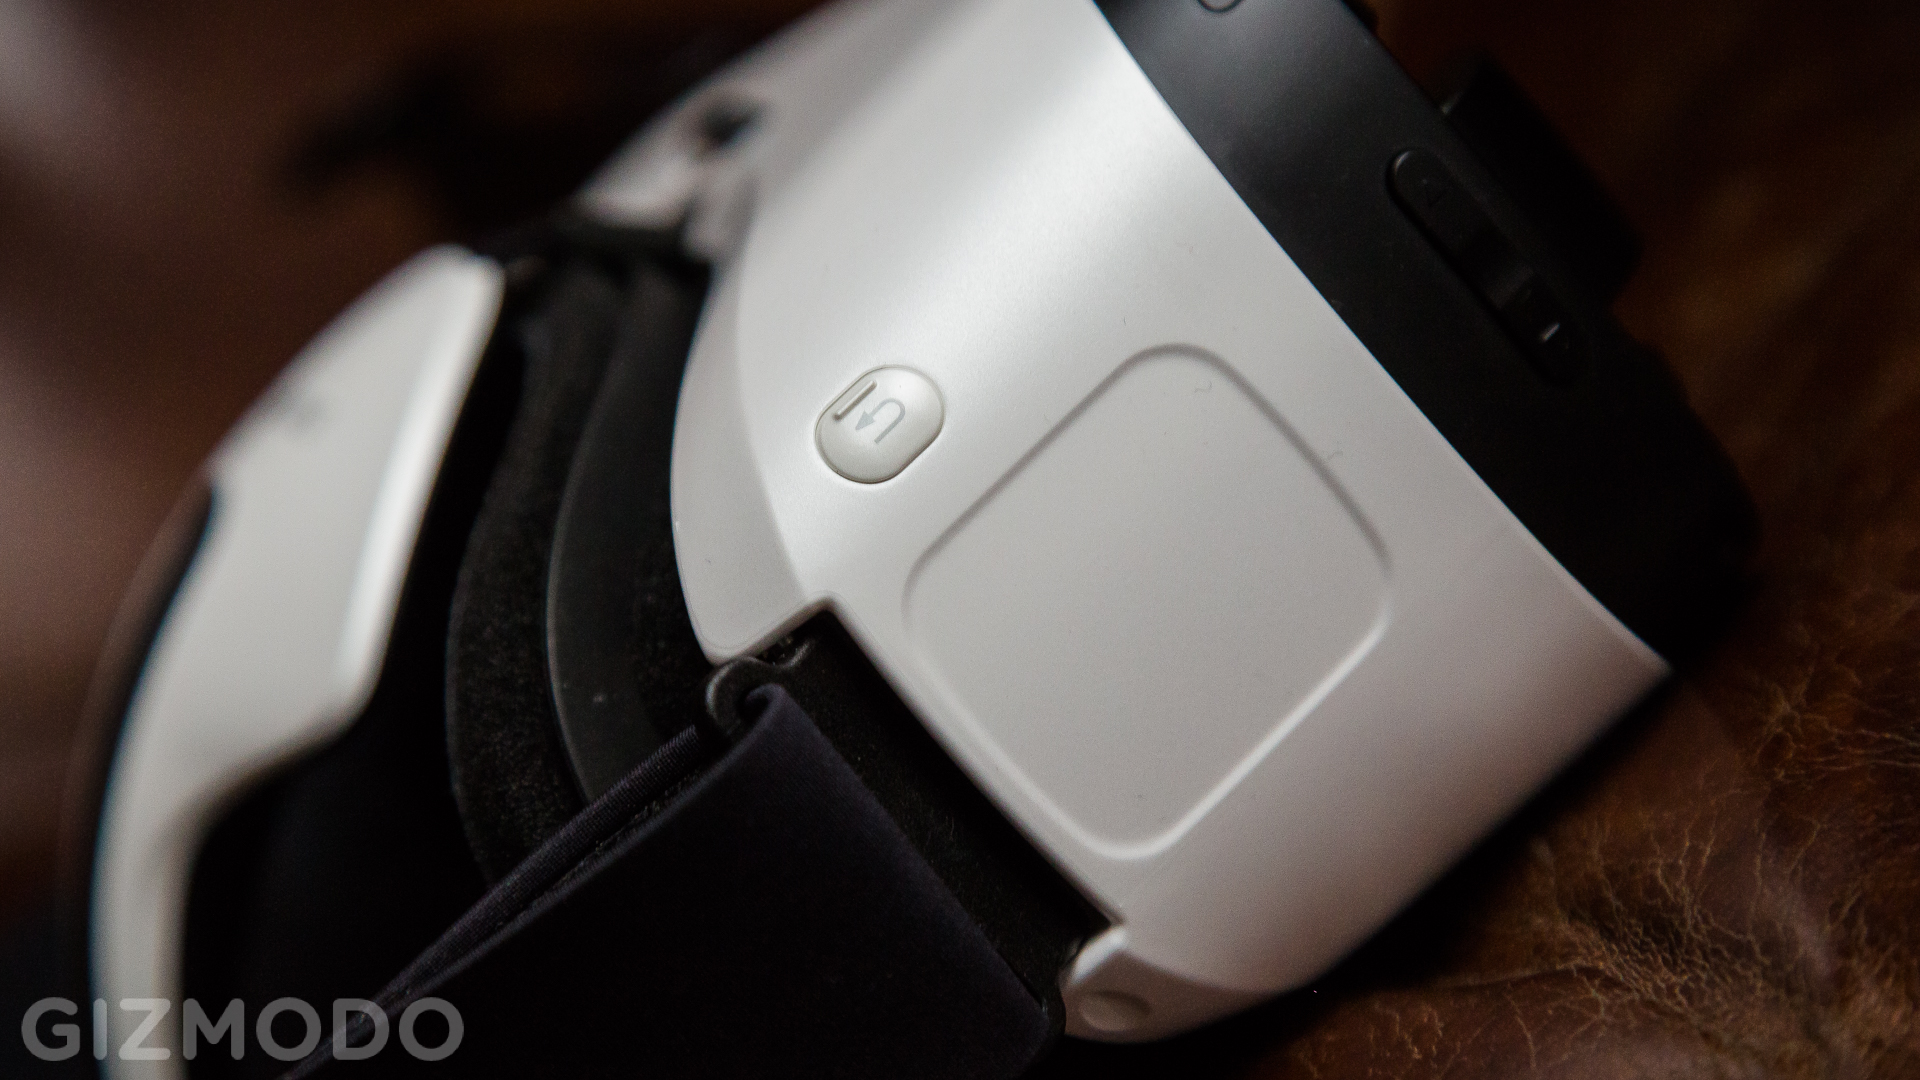 Samsung Gear VR Review: Hell Yes I’ll Strap This Phone To My Face